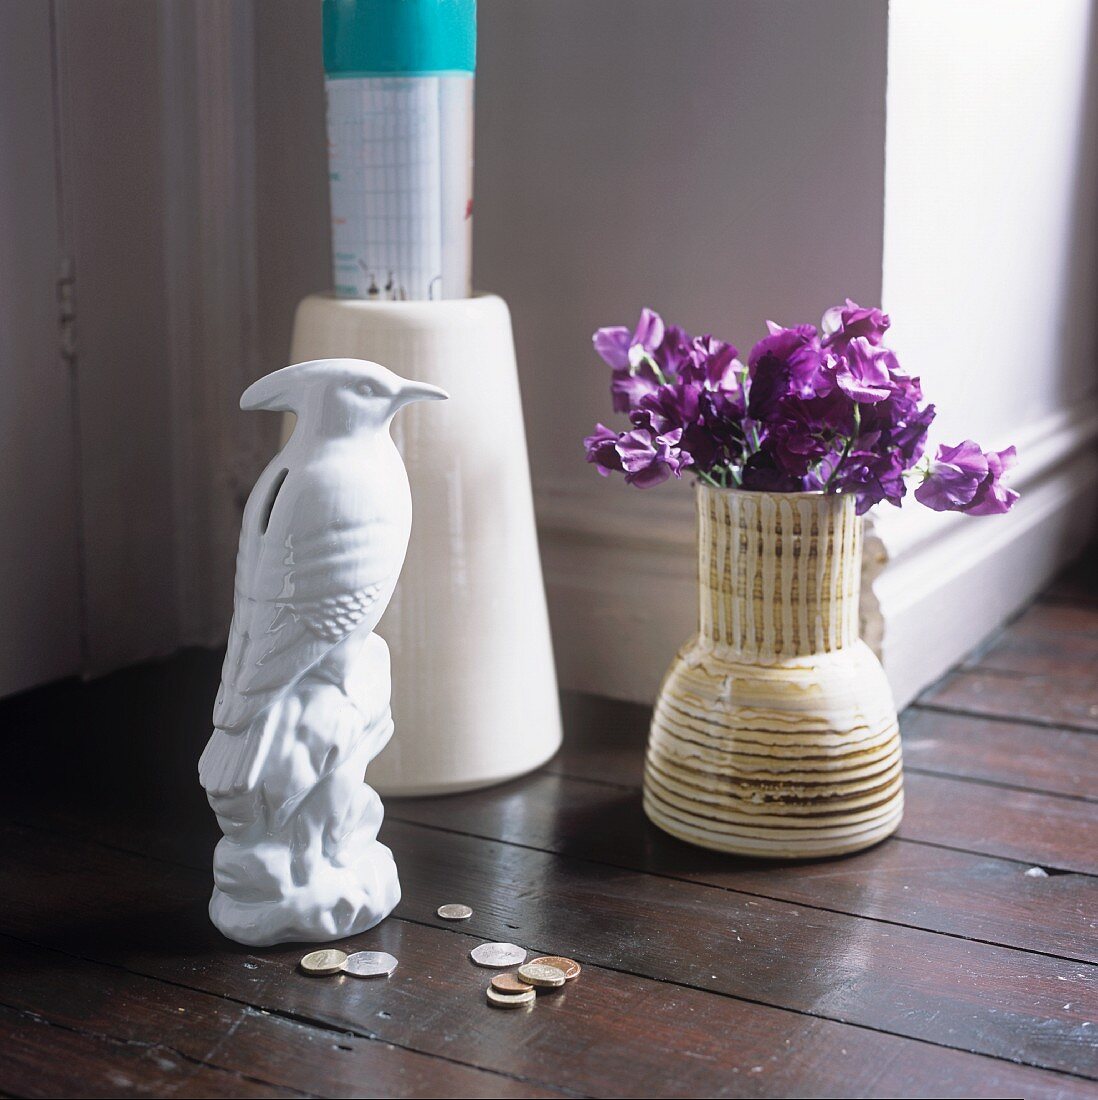 A white bird figurine next to a vase on flowers on a wooden floor